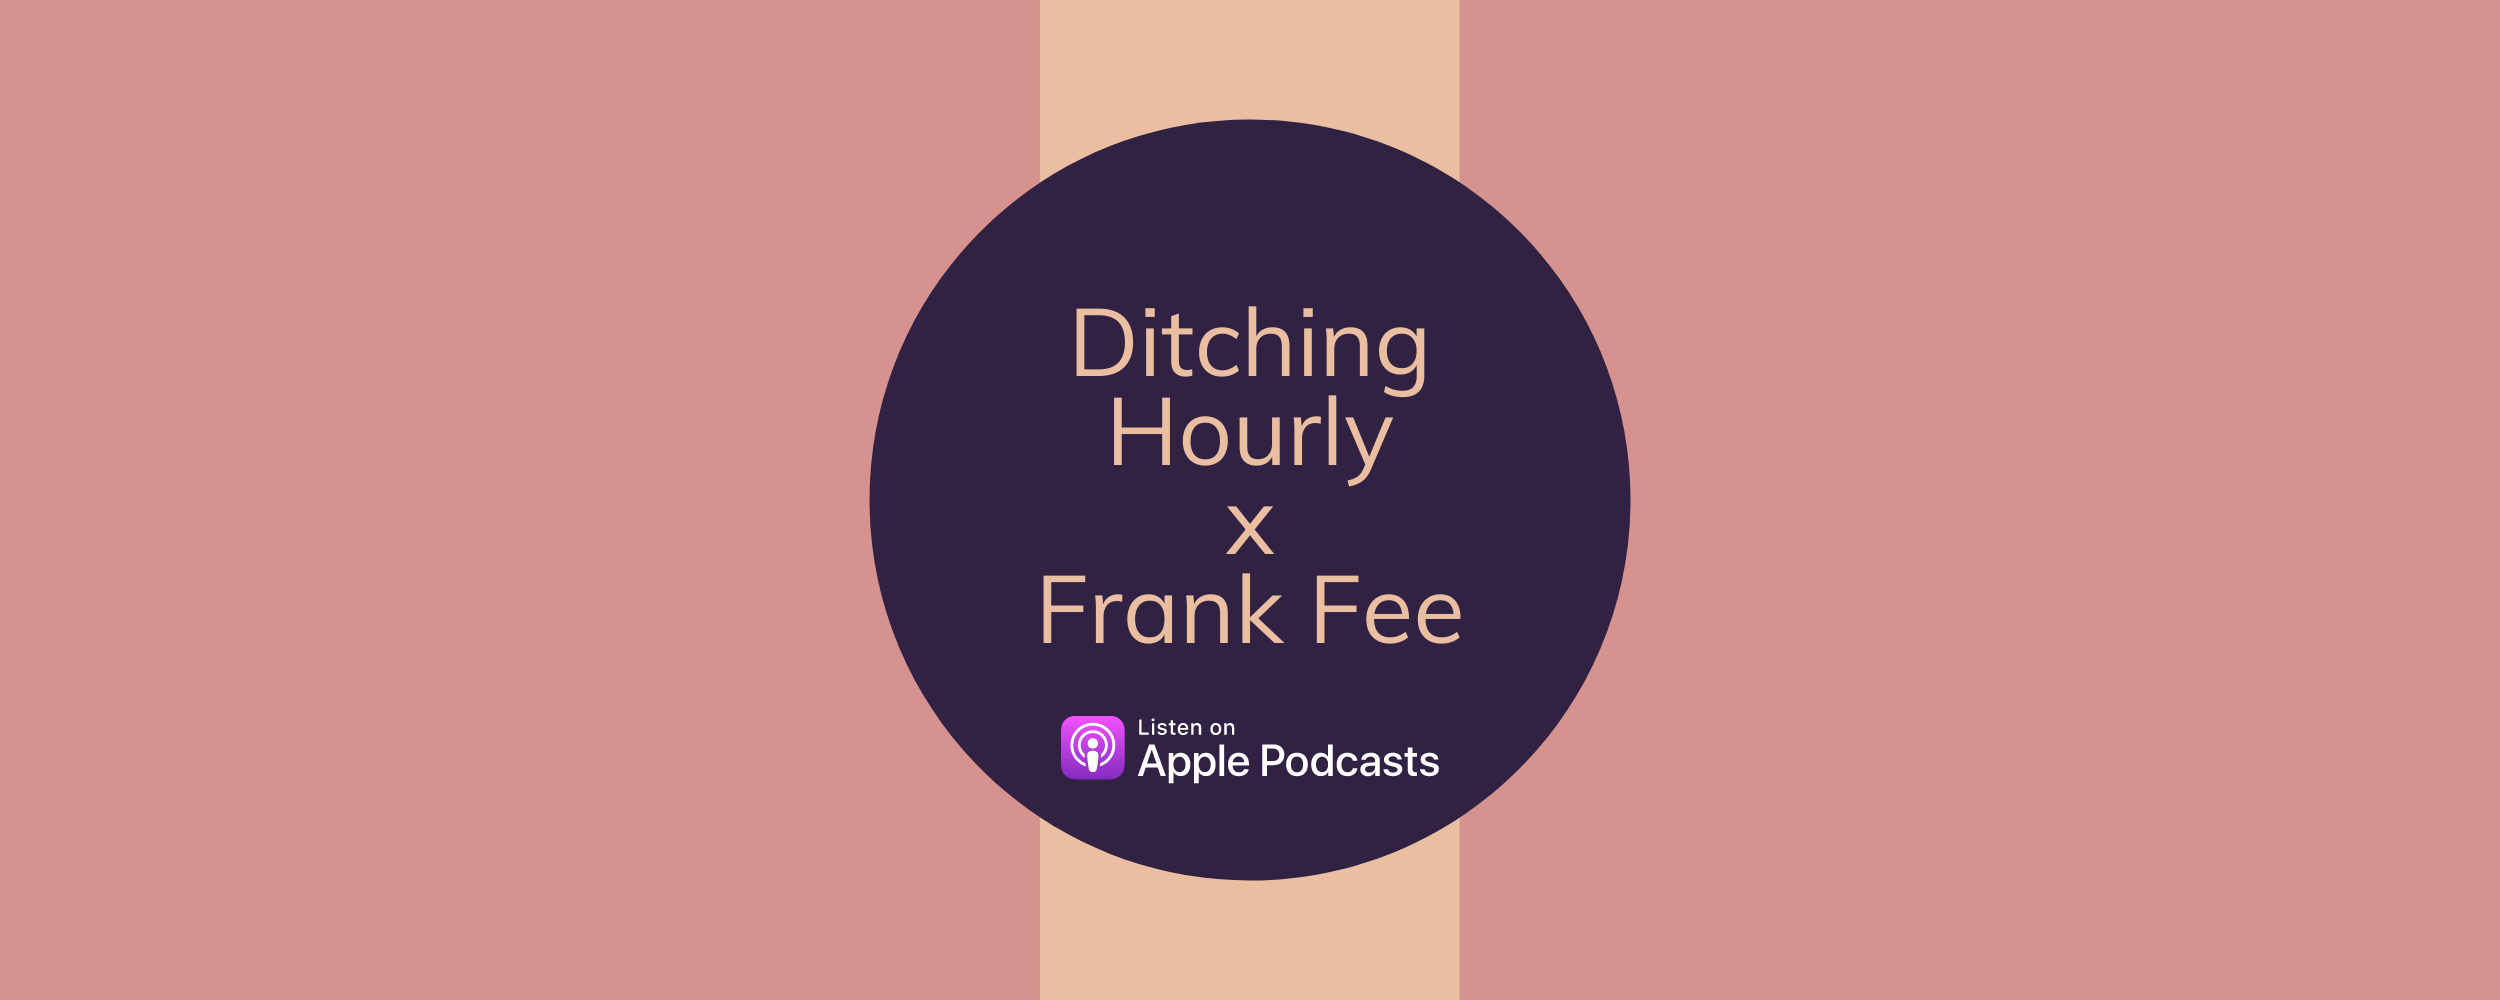 Ditching Hourly x Frank Fee_thumb